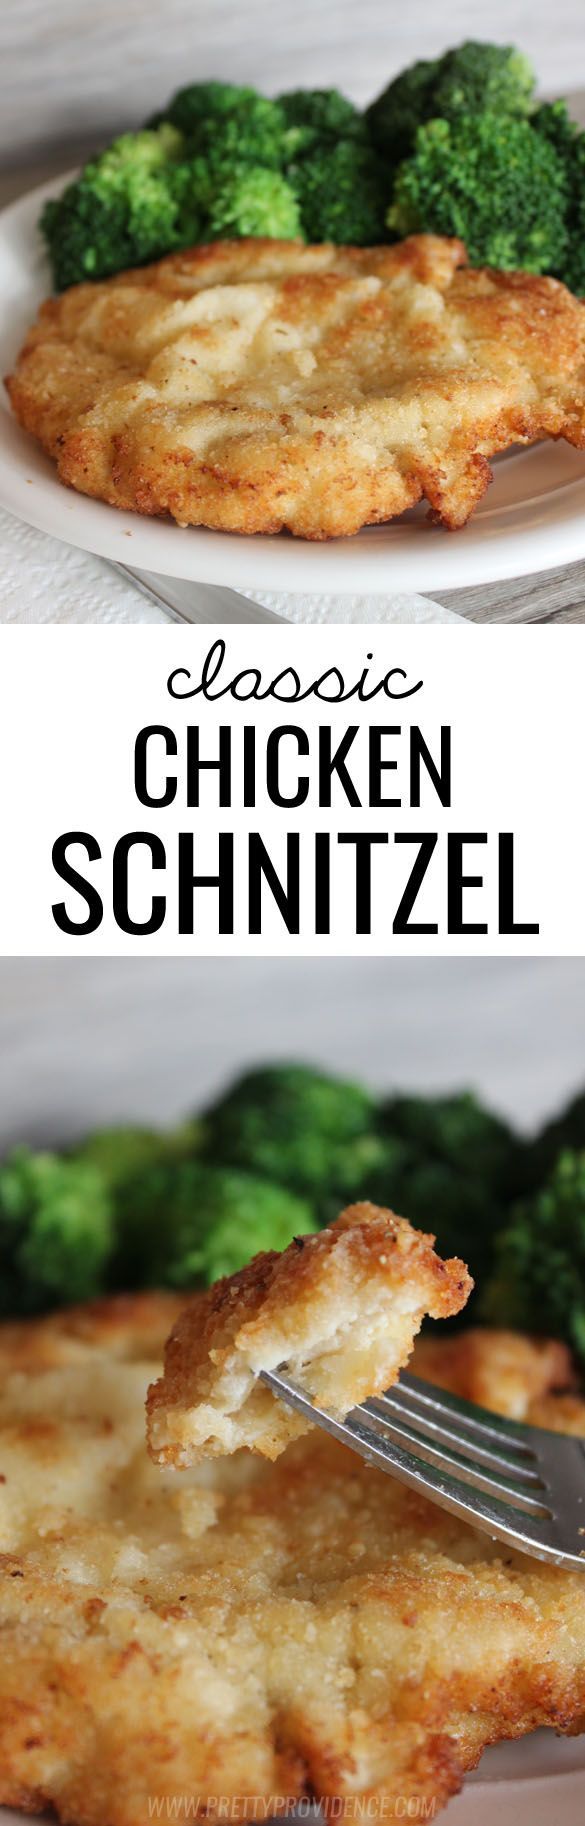 This classic chicken schnitzel cannot be beat! Such a yummy dinner option the whole family will love!: